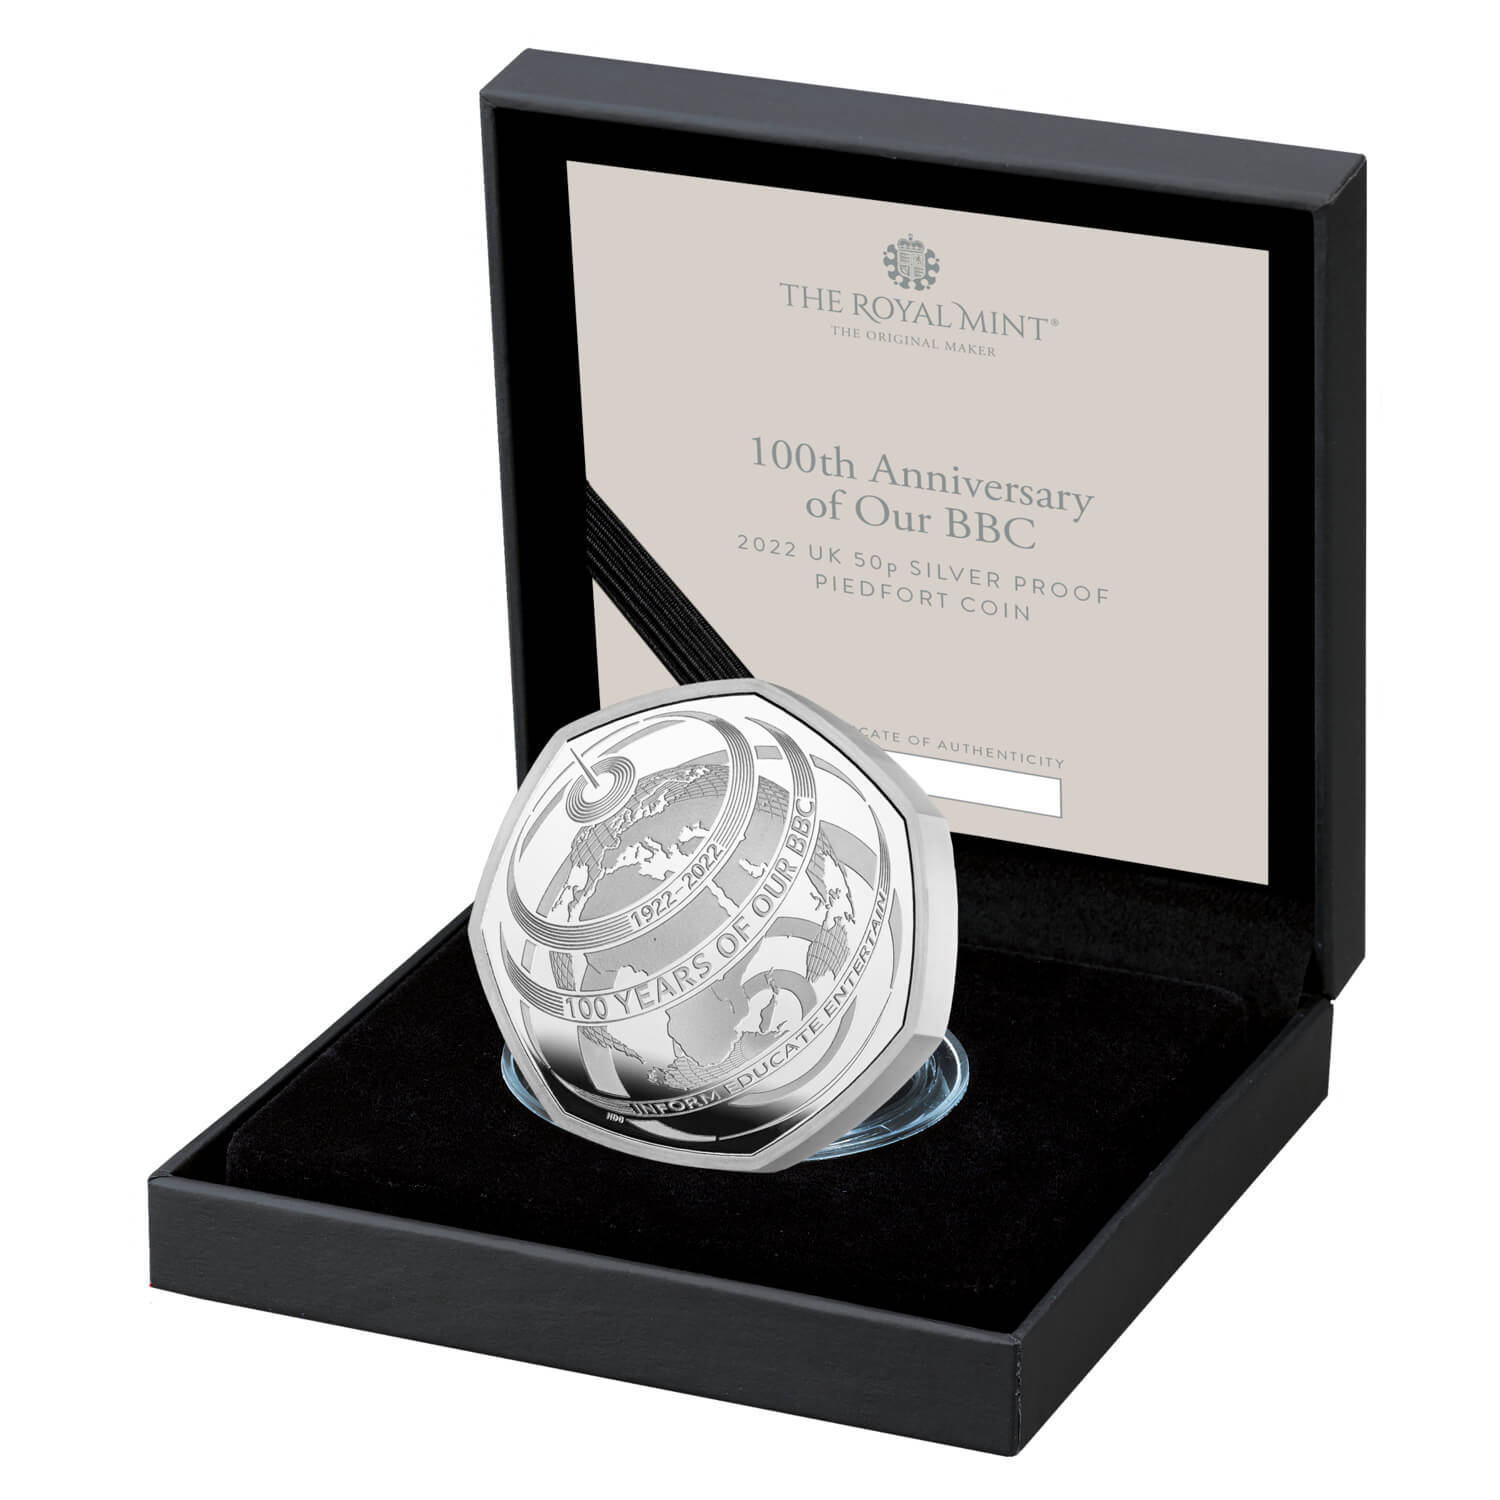 100th-anniversary-of-the-bbc-uk-50p-silver-proof-piedfort-coin-case-left---uk22bbpf-1500x1500-f3a2c67